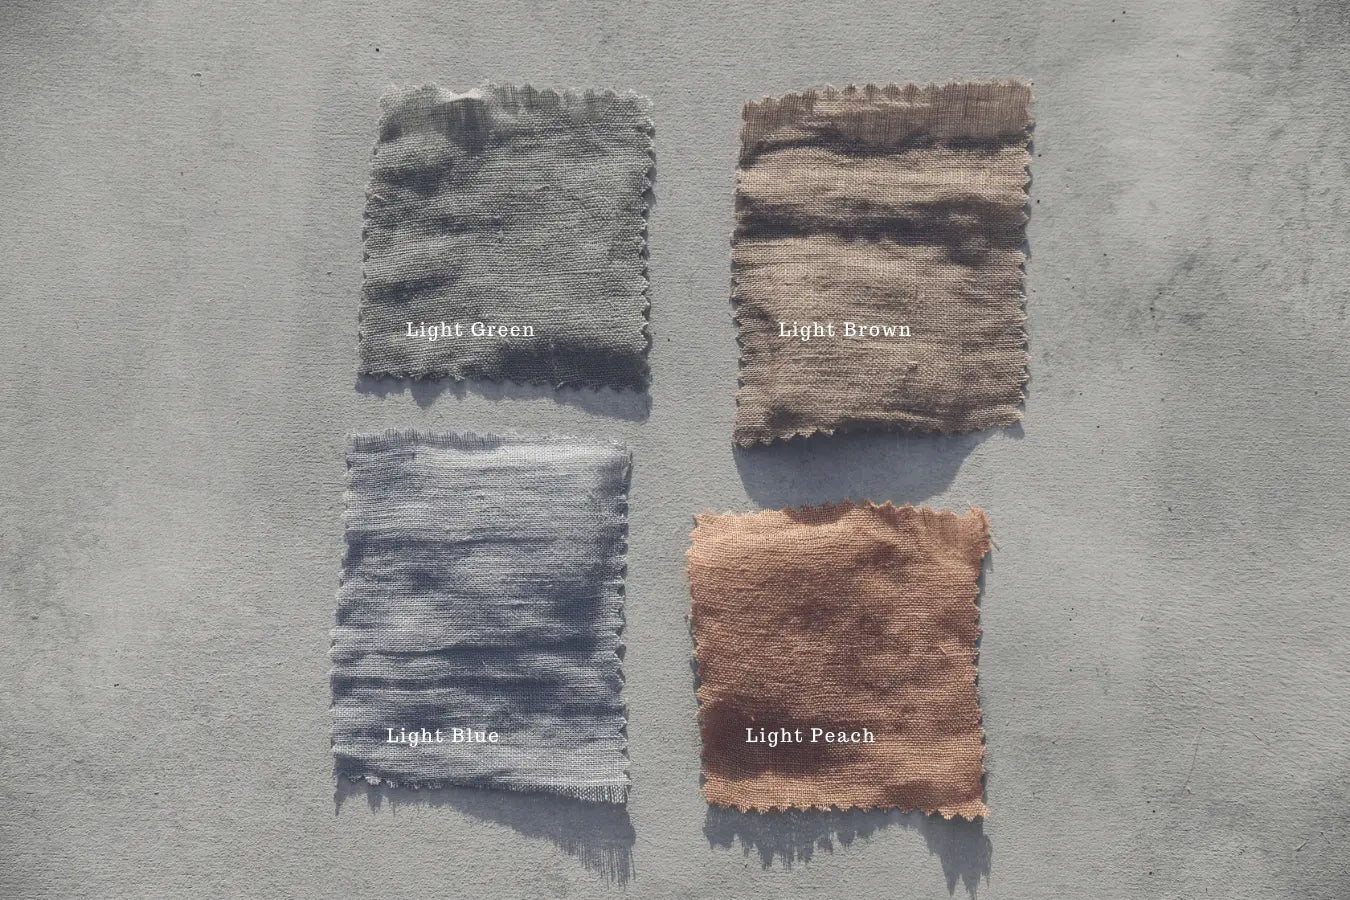 Lightweight and Gauze Linen Colour Fabric Swatches / Sample Pack Standard Shipping - Epic Linen luxury linen